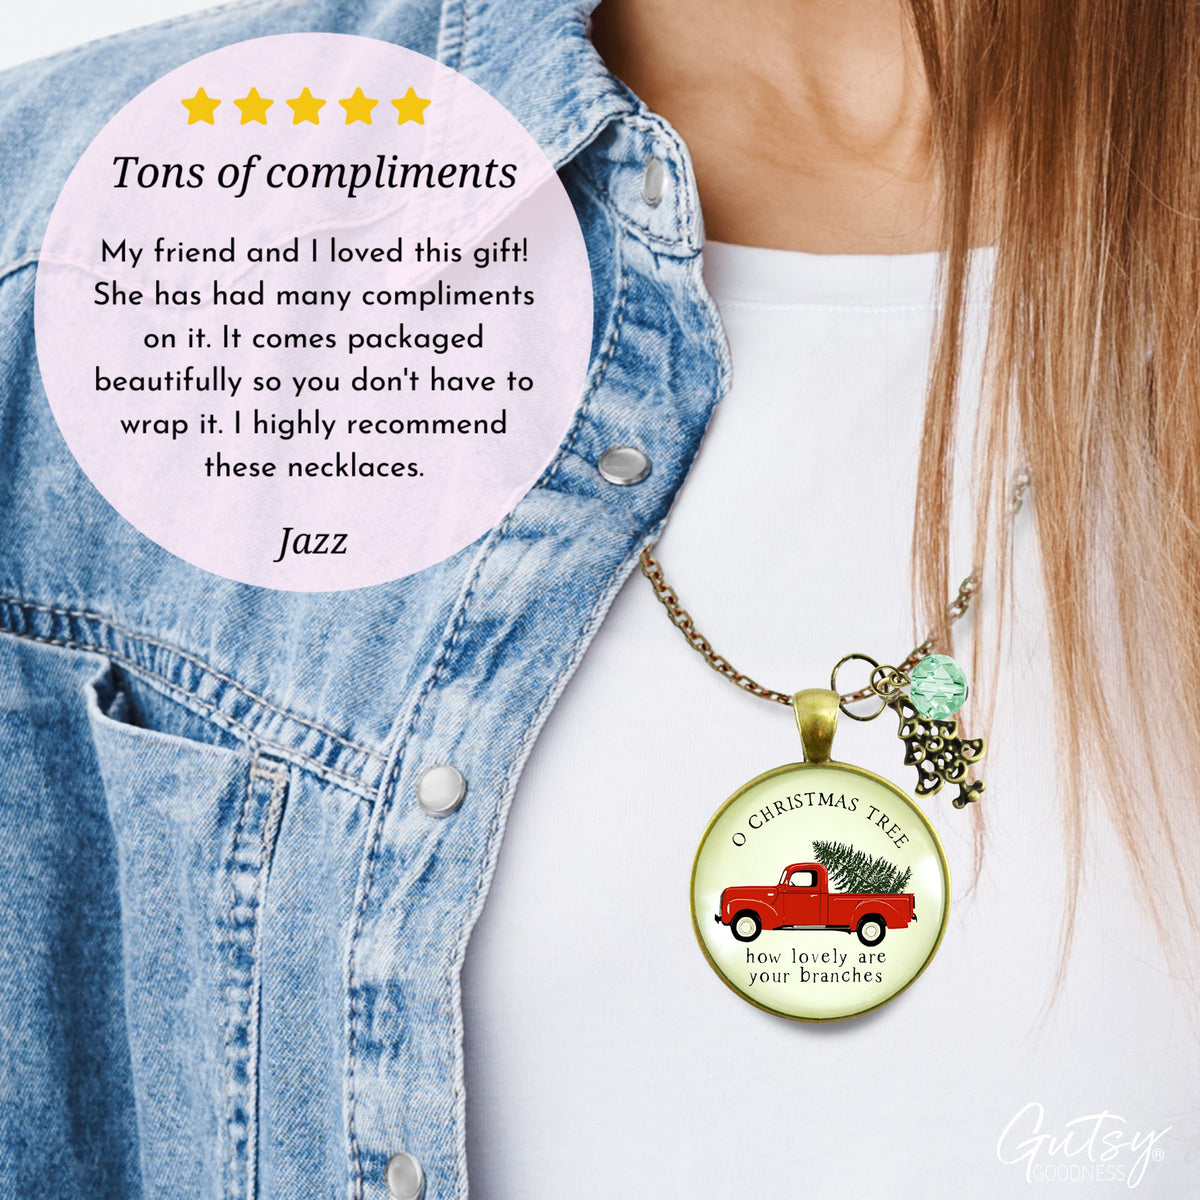 Red Truck Vintage Theme Christmas Necklace Holiday Tree Charm Jewelry O Christmas Tree Handmade Gift Jewelry  Necklace - Gutsy Goodness Handmade Jewelry